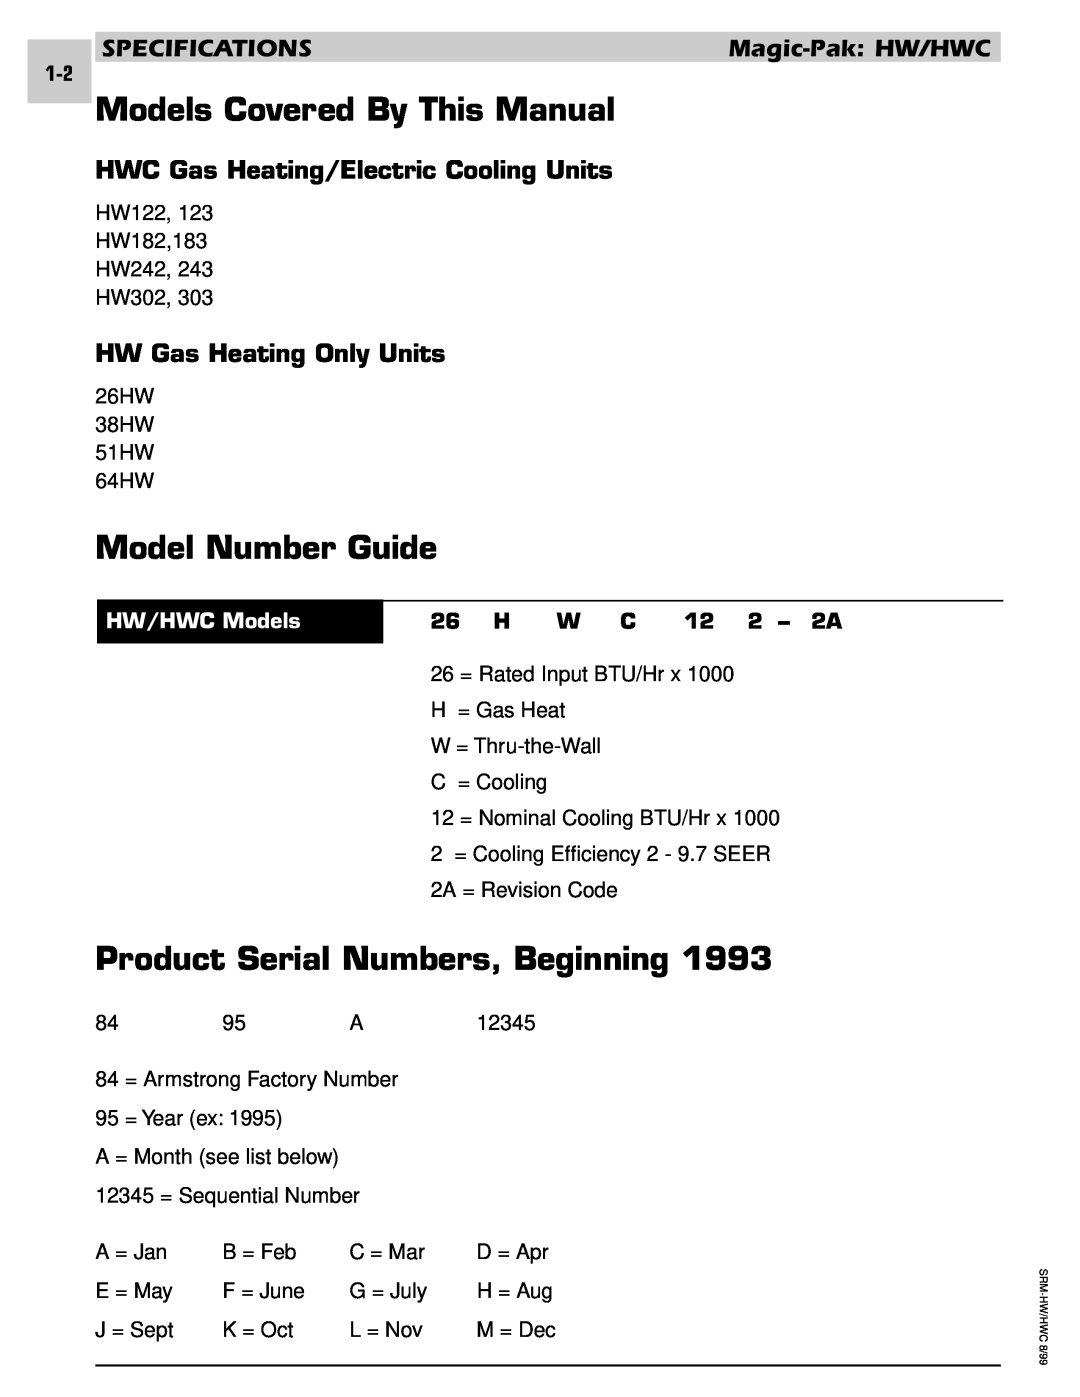 Armstrong World Industries 203, 243 Models Covered By This Manual, Model Number Guide, Product Serial Numbers, Beginning 